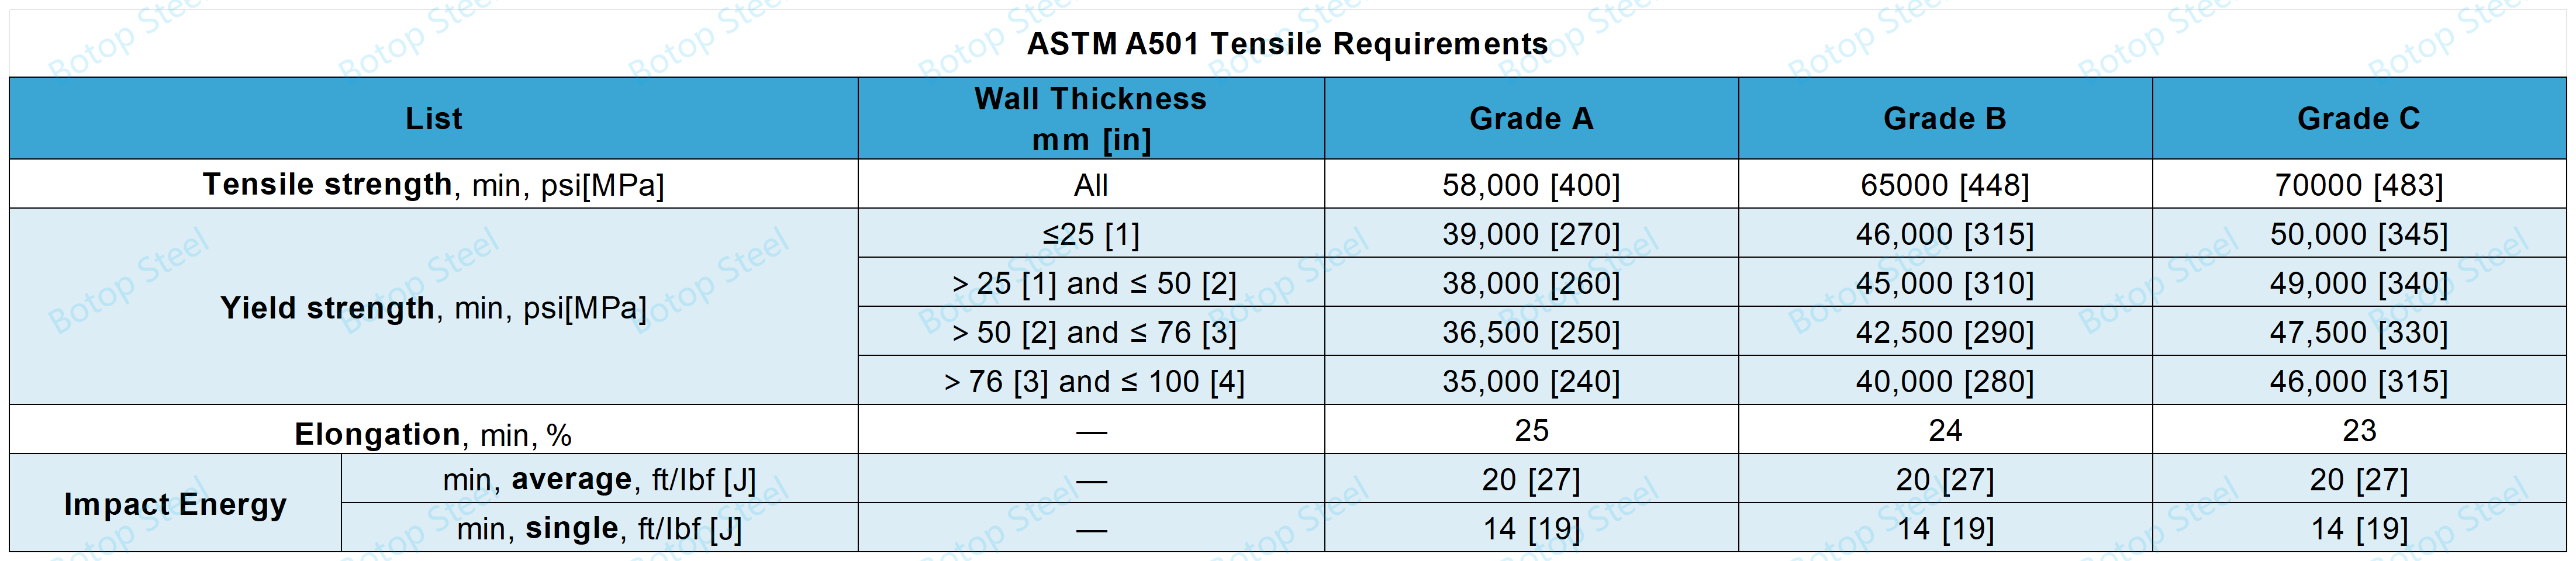 astm a501_Tensile Requirements